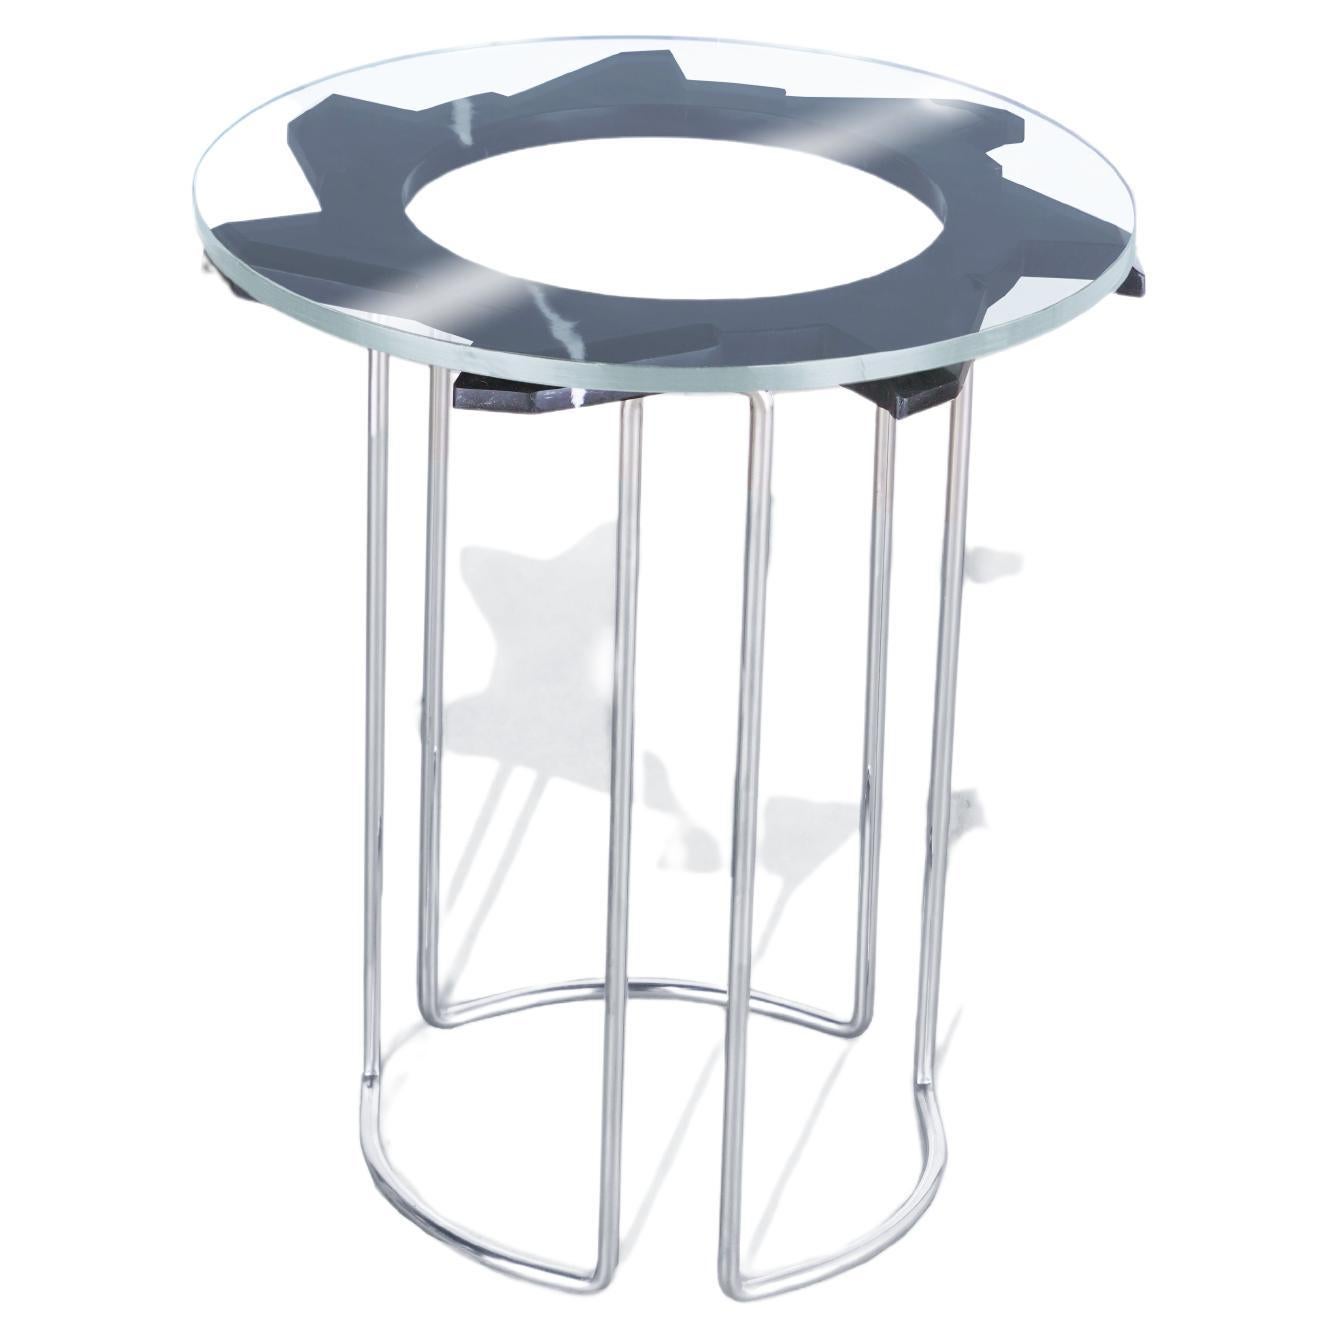 Buzzsaw End Table, Black For Sale